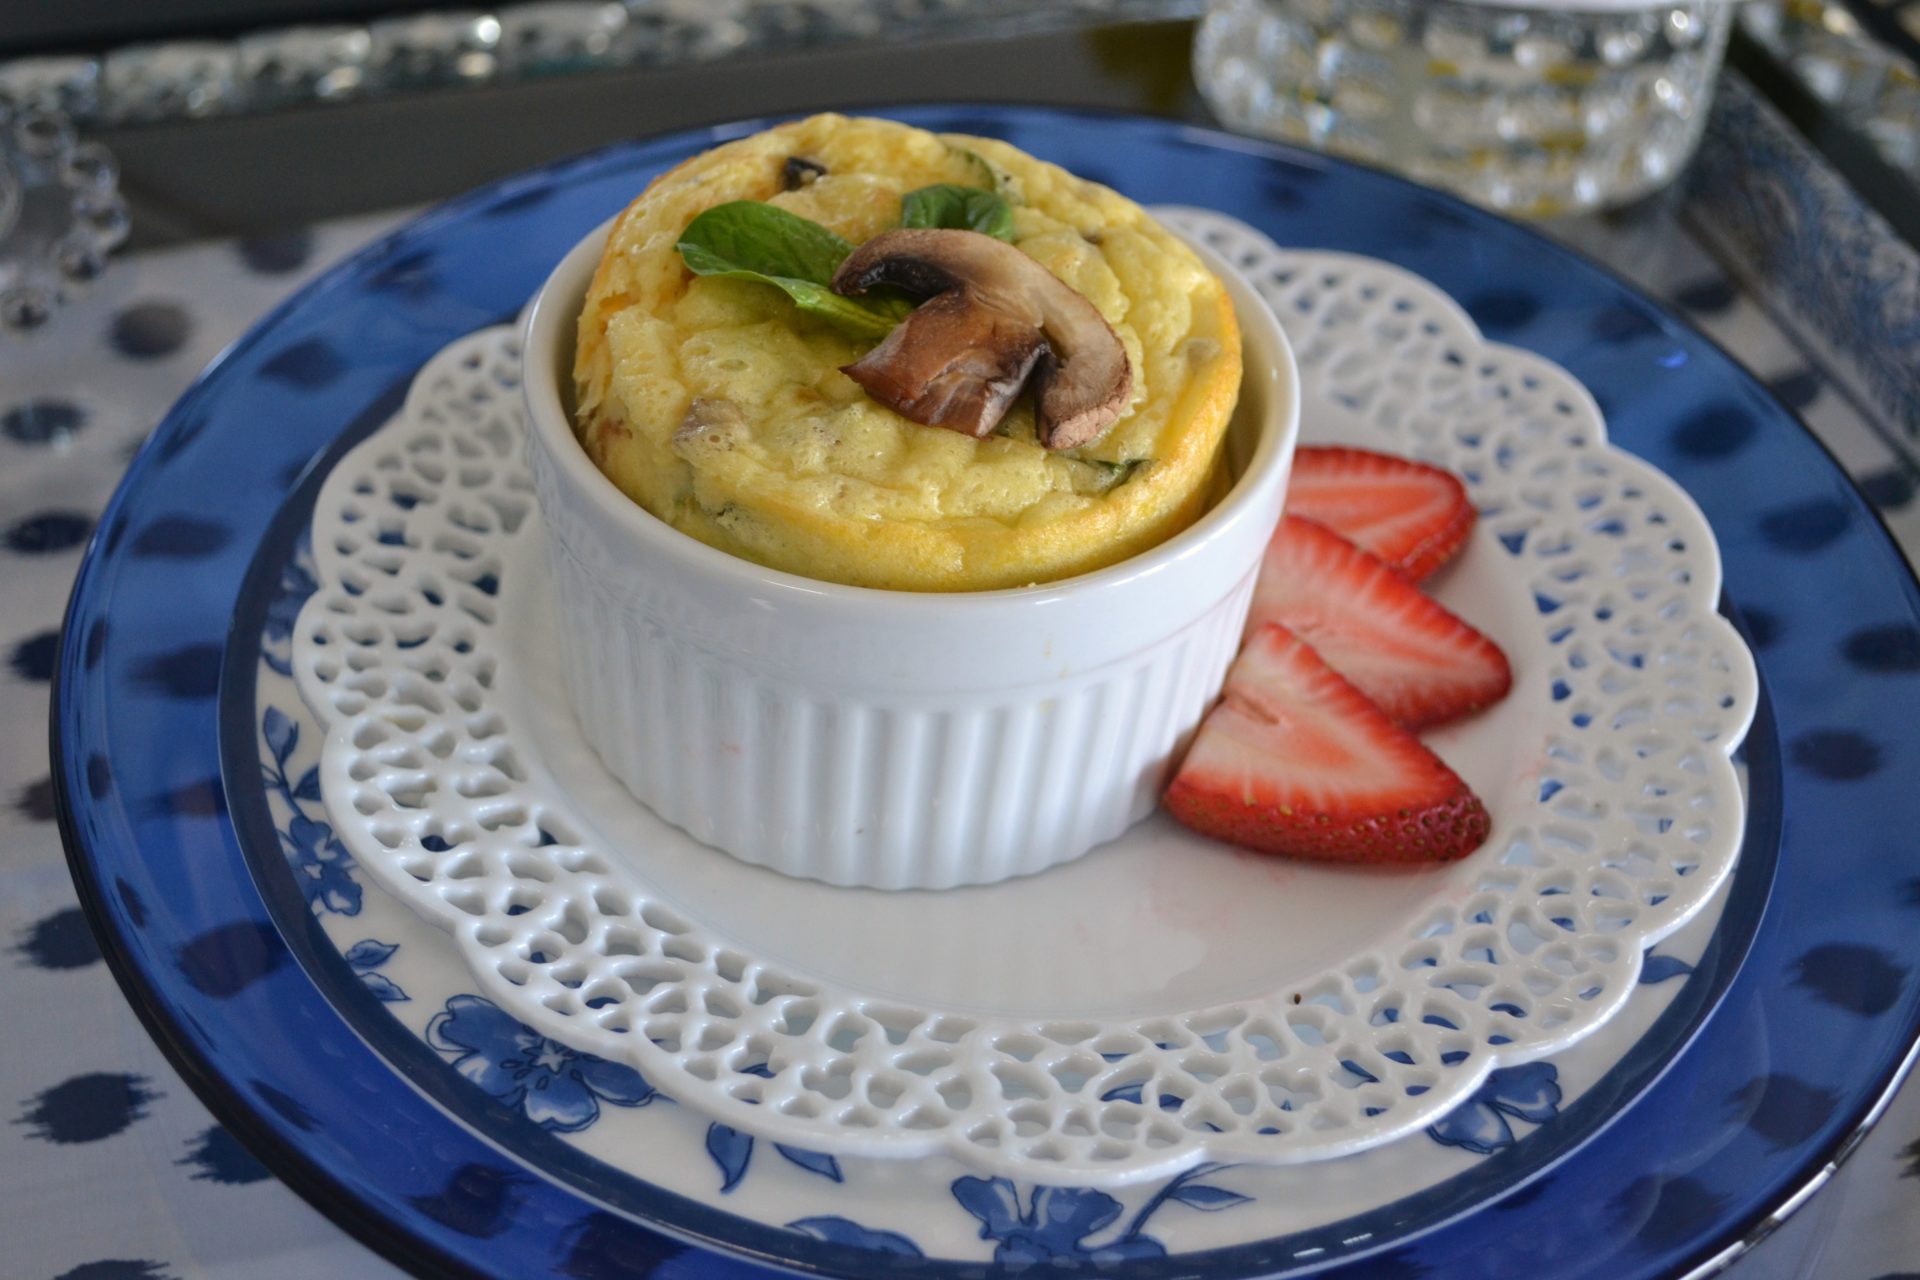 Mothers Day-breakfast in bed, egg souffle